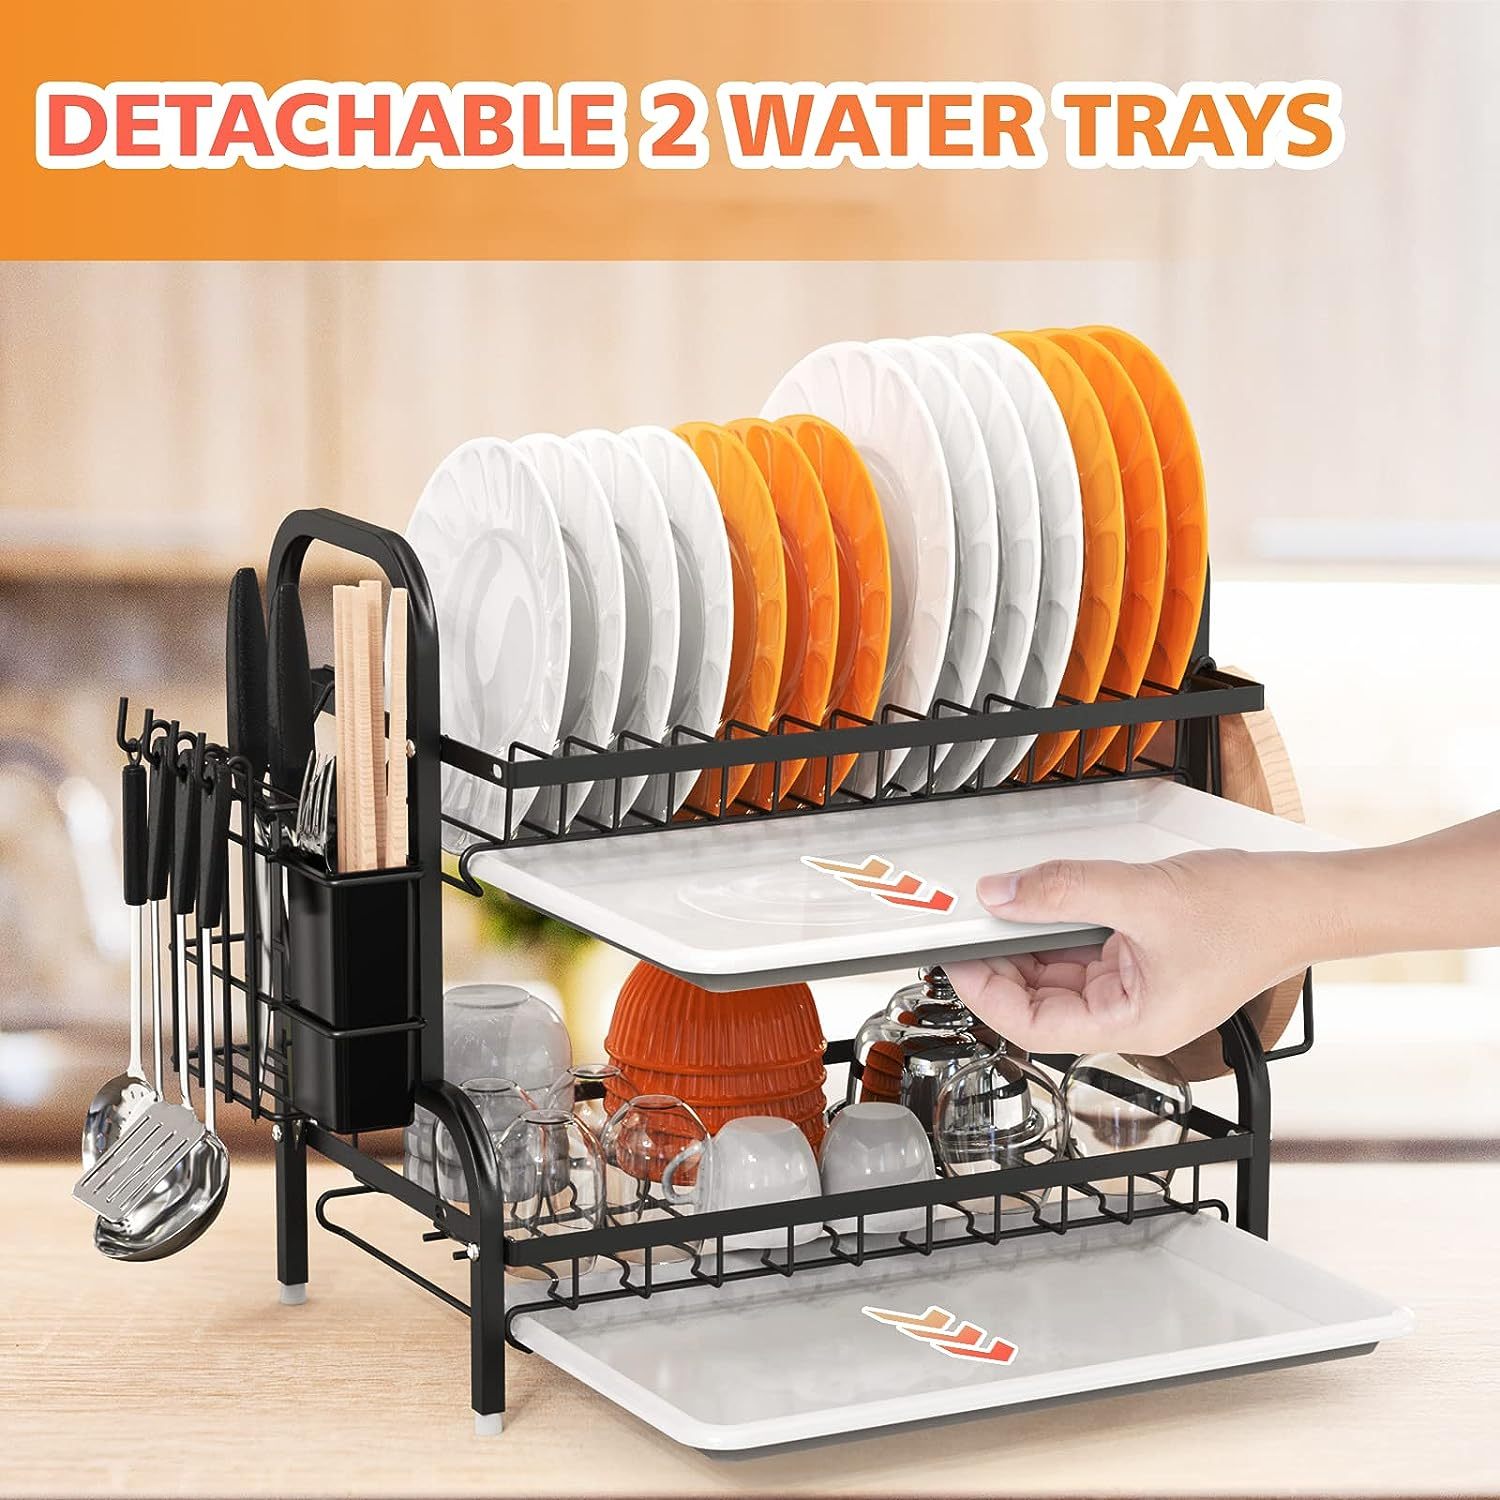 Dish Drying Rack, 2-Tier Dish Racks For Kitchen Counter, Sink Dish Drainer With Drainboard, Utensil Holder And Cutting Board Holder, Stainless Steel Kitchen Drying Rack-Black